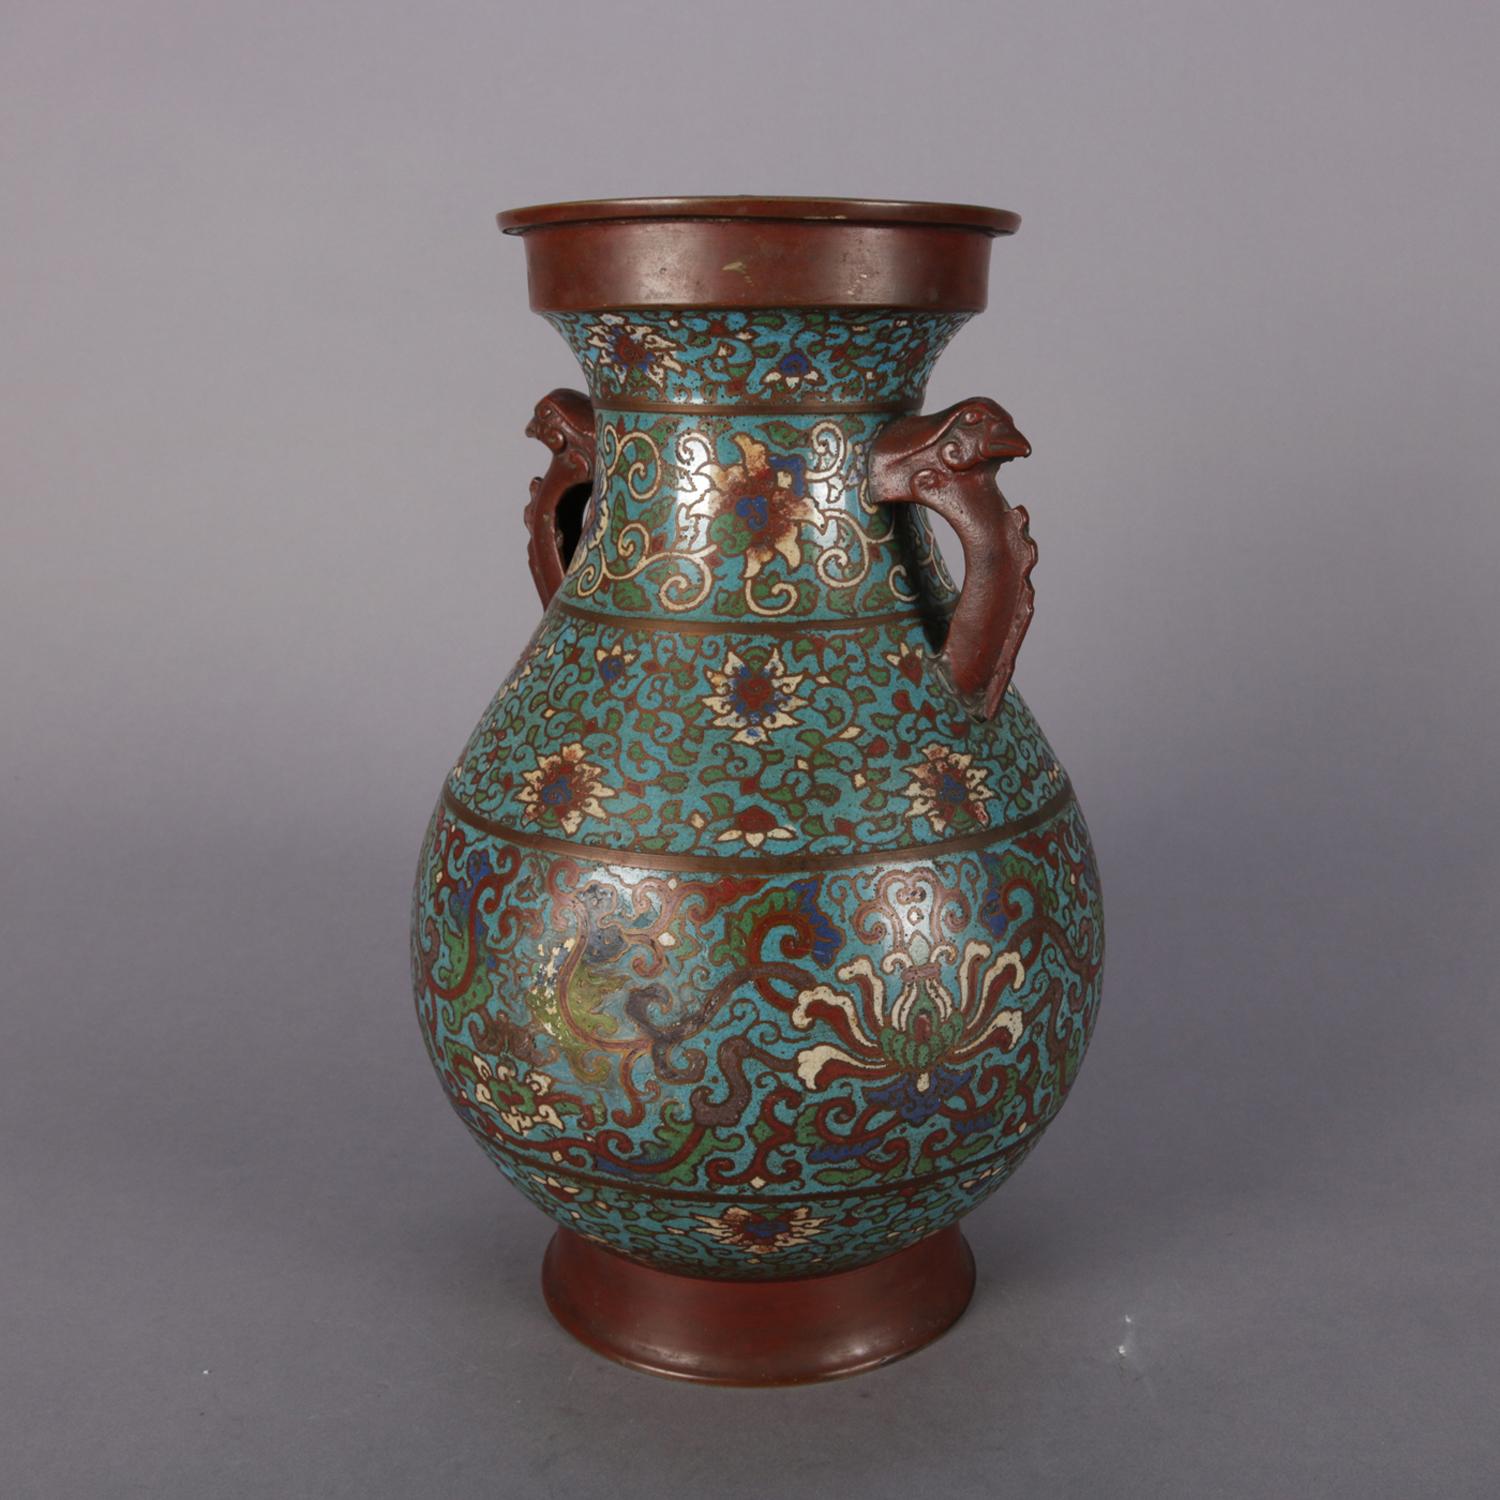 Antique Chinese Cloisonne double handle urn features bronze construction with floral and scroll enamelled decoration, circa 1900.

Measures: 14.5